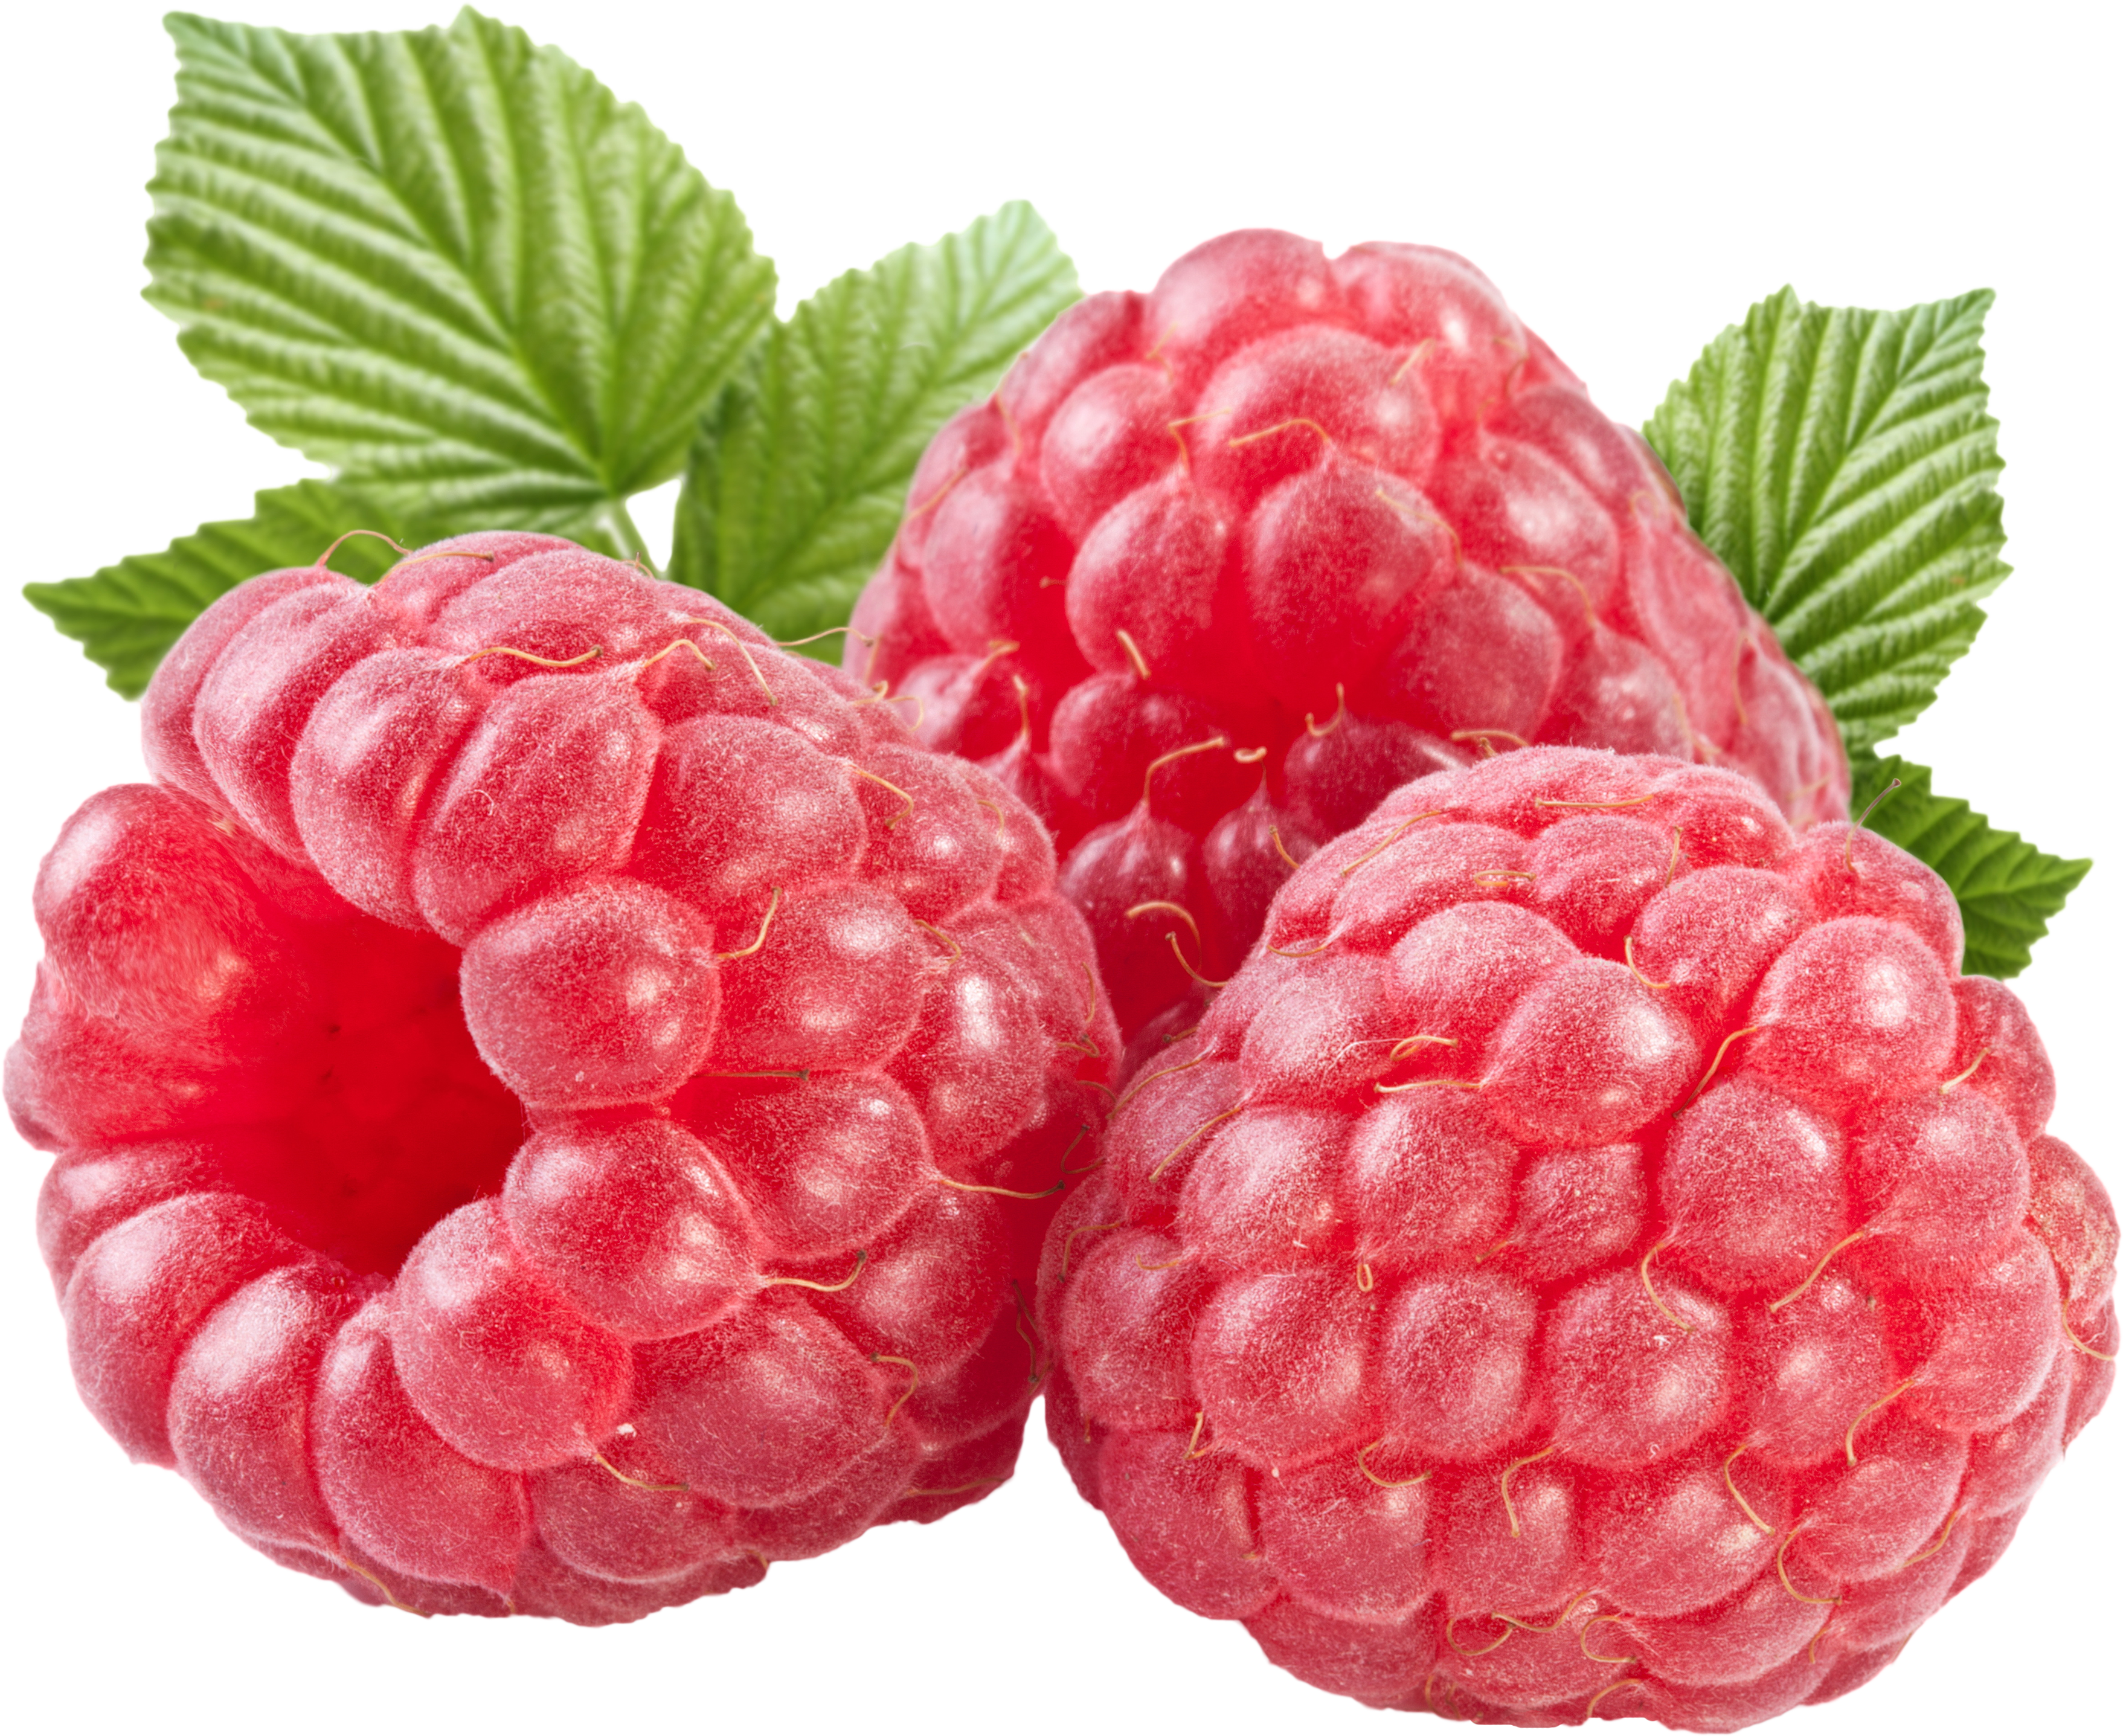 Rraspberry Png Image - Raspberry, Transparent background PNG HD thumbnail